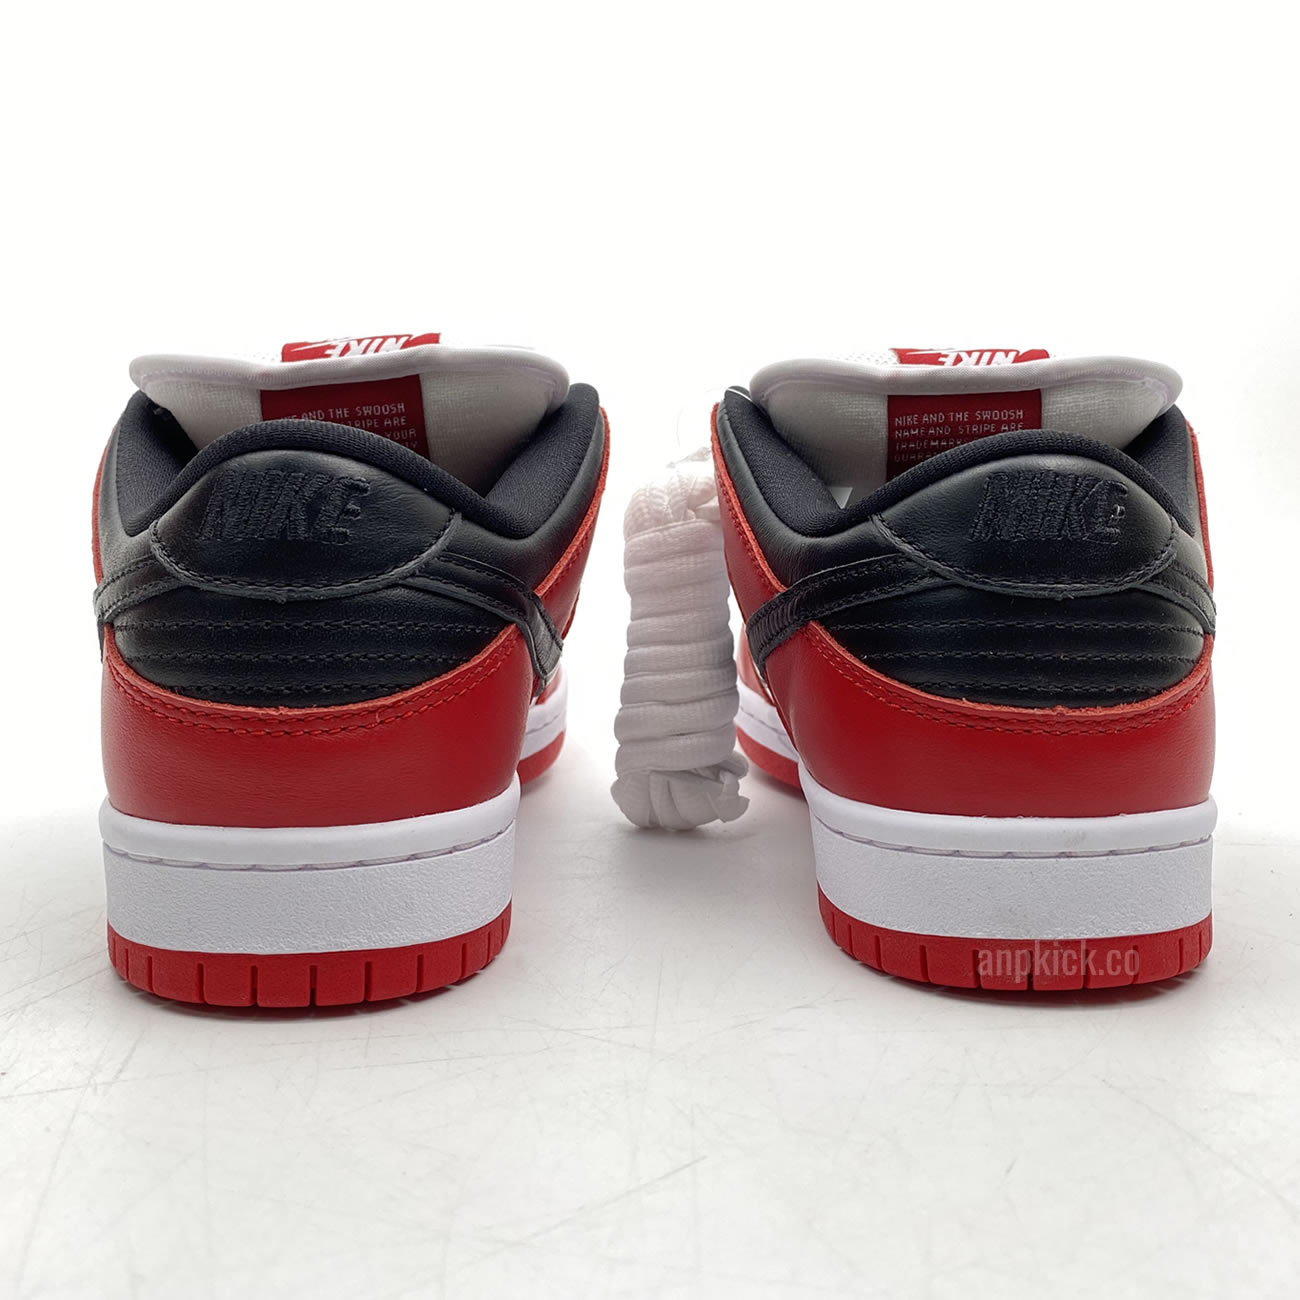 Nike Sb Dunk Low Pro Chicago Varsity Red Release Date Bq6817 600 (3) - newkick.org